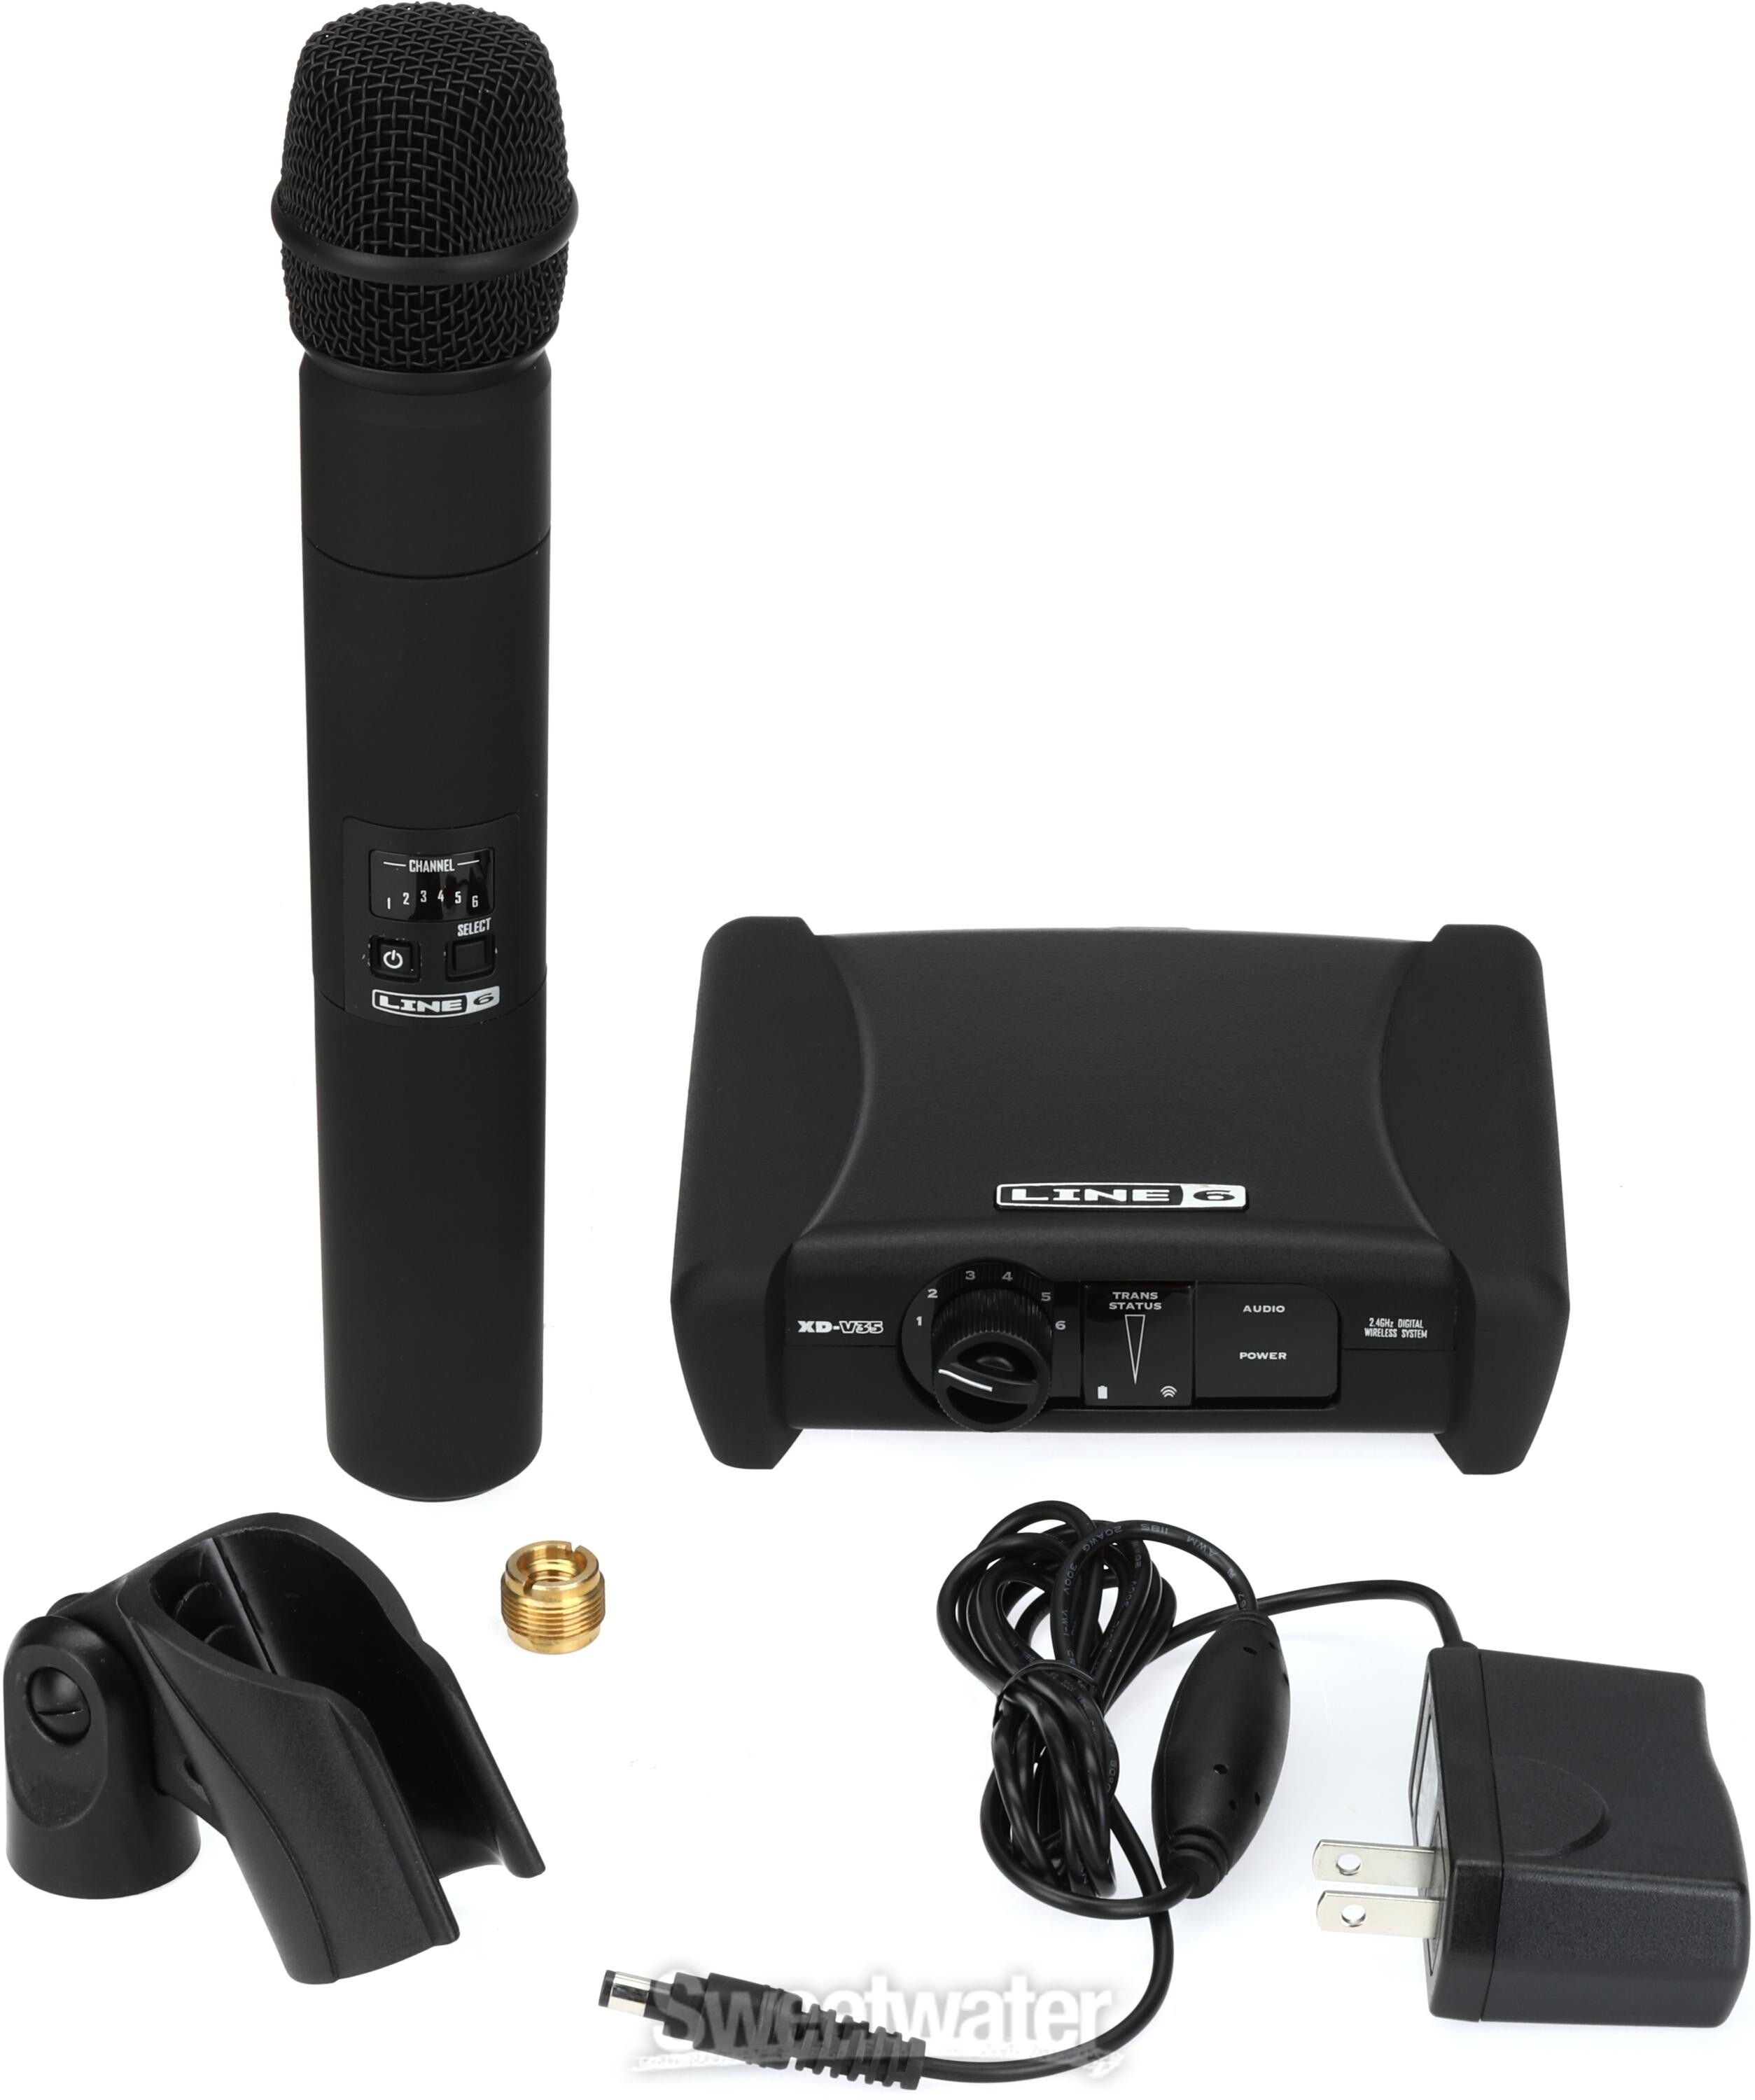 Line 6 XD-V35 Digital Wireless Handheld Microphone System | Sweetwater